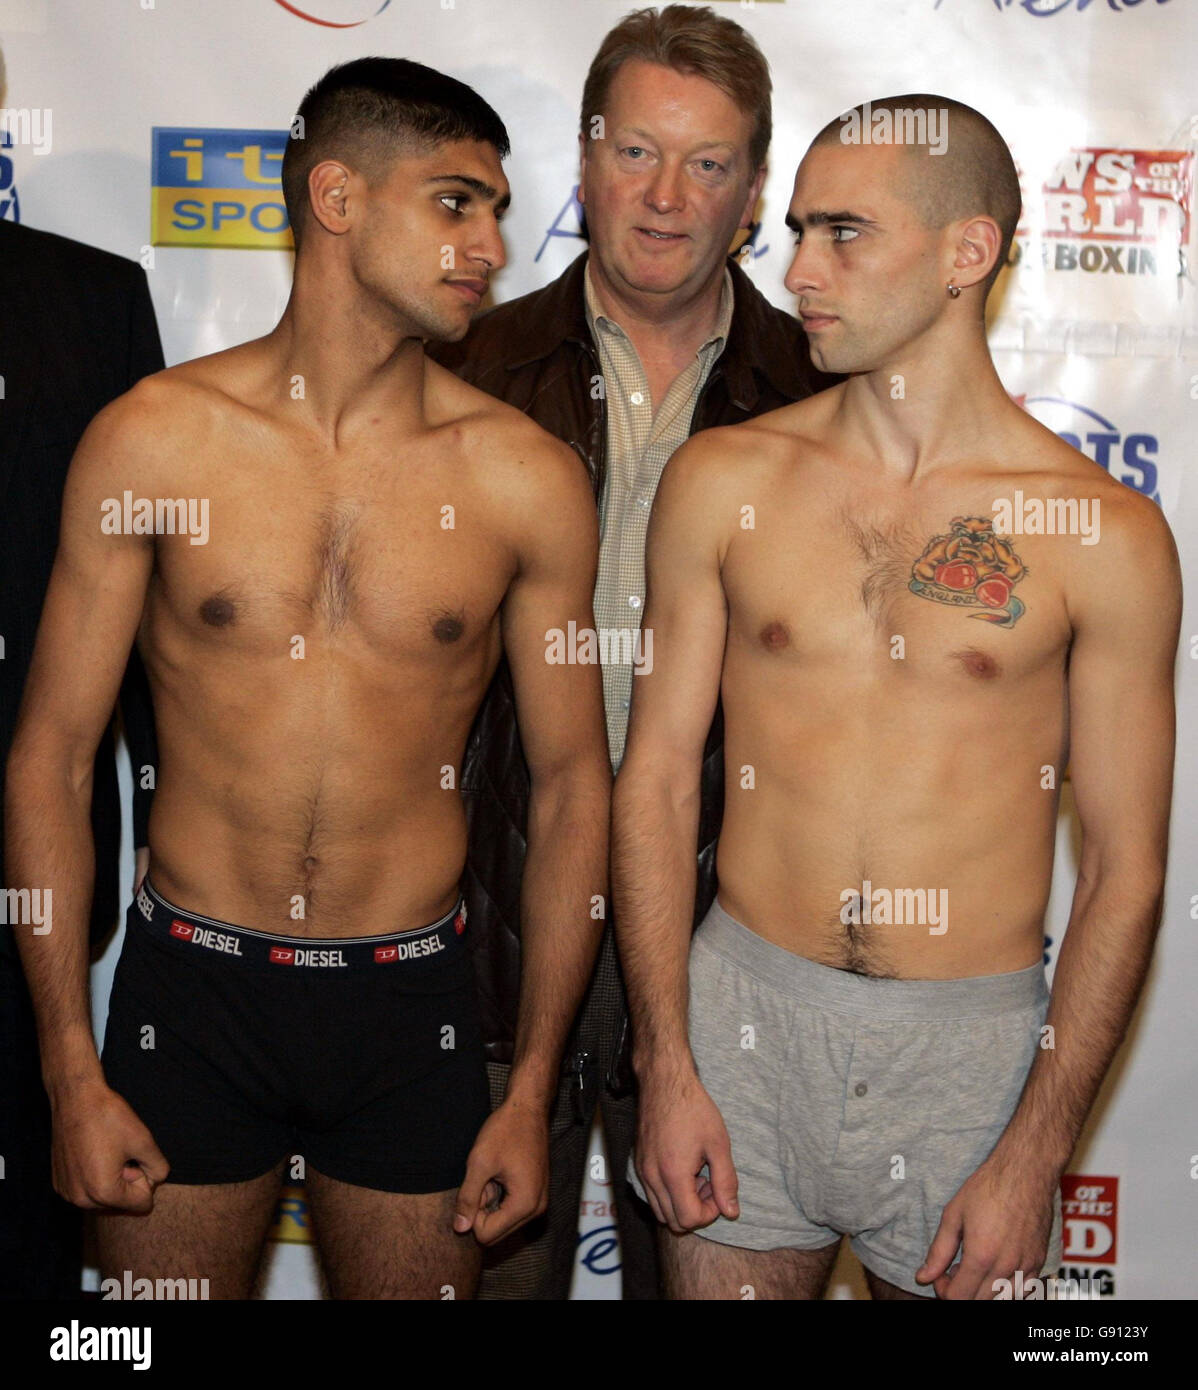 Promoter Frank Warren (C) watches as Amir Khan (L) squares up to Steve Gethin during the weigh-in at the Marriot Hotel, Glasgow, Friday November 4, 2005. Amir Khan fights Steve Gethin on the undercard of the WBO Featherweight contest between Scott Harrison and Nedal Hussein. Watch for PA story BOXING Khan. PRESS ASSOCIATION Photo. Photo credit should read: Andrew Milligan/PA. Stock Photo